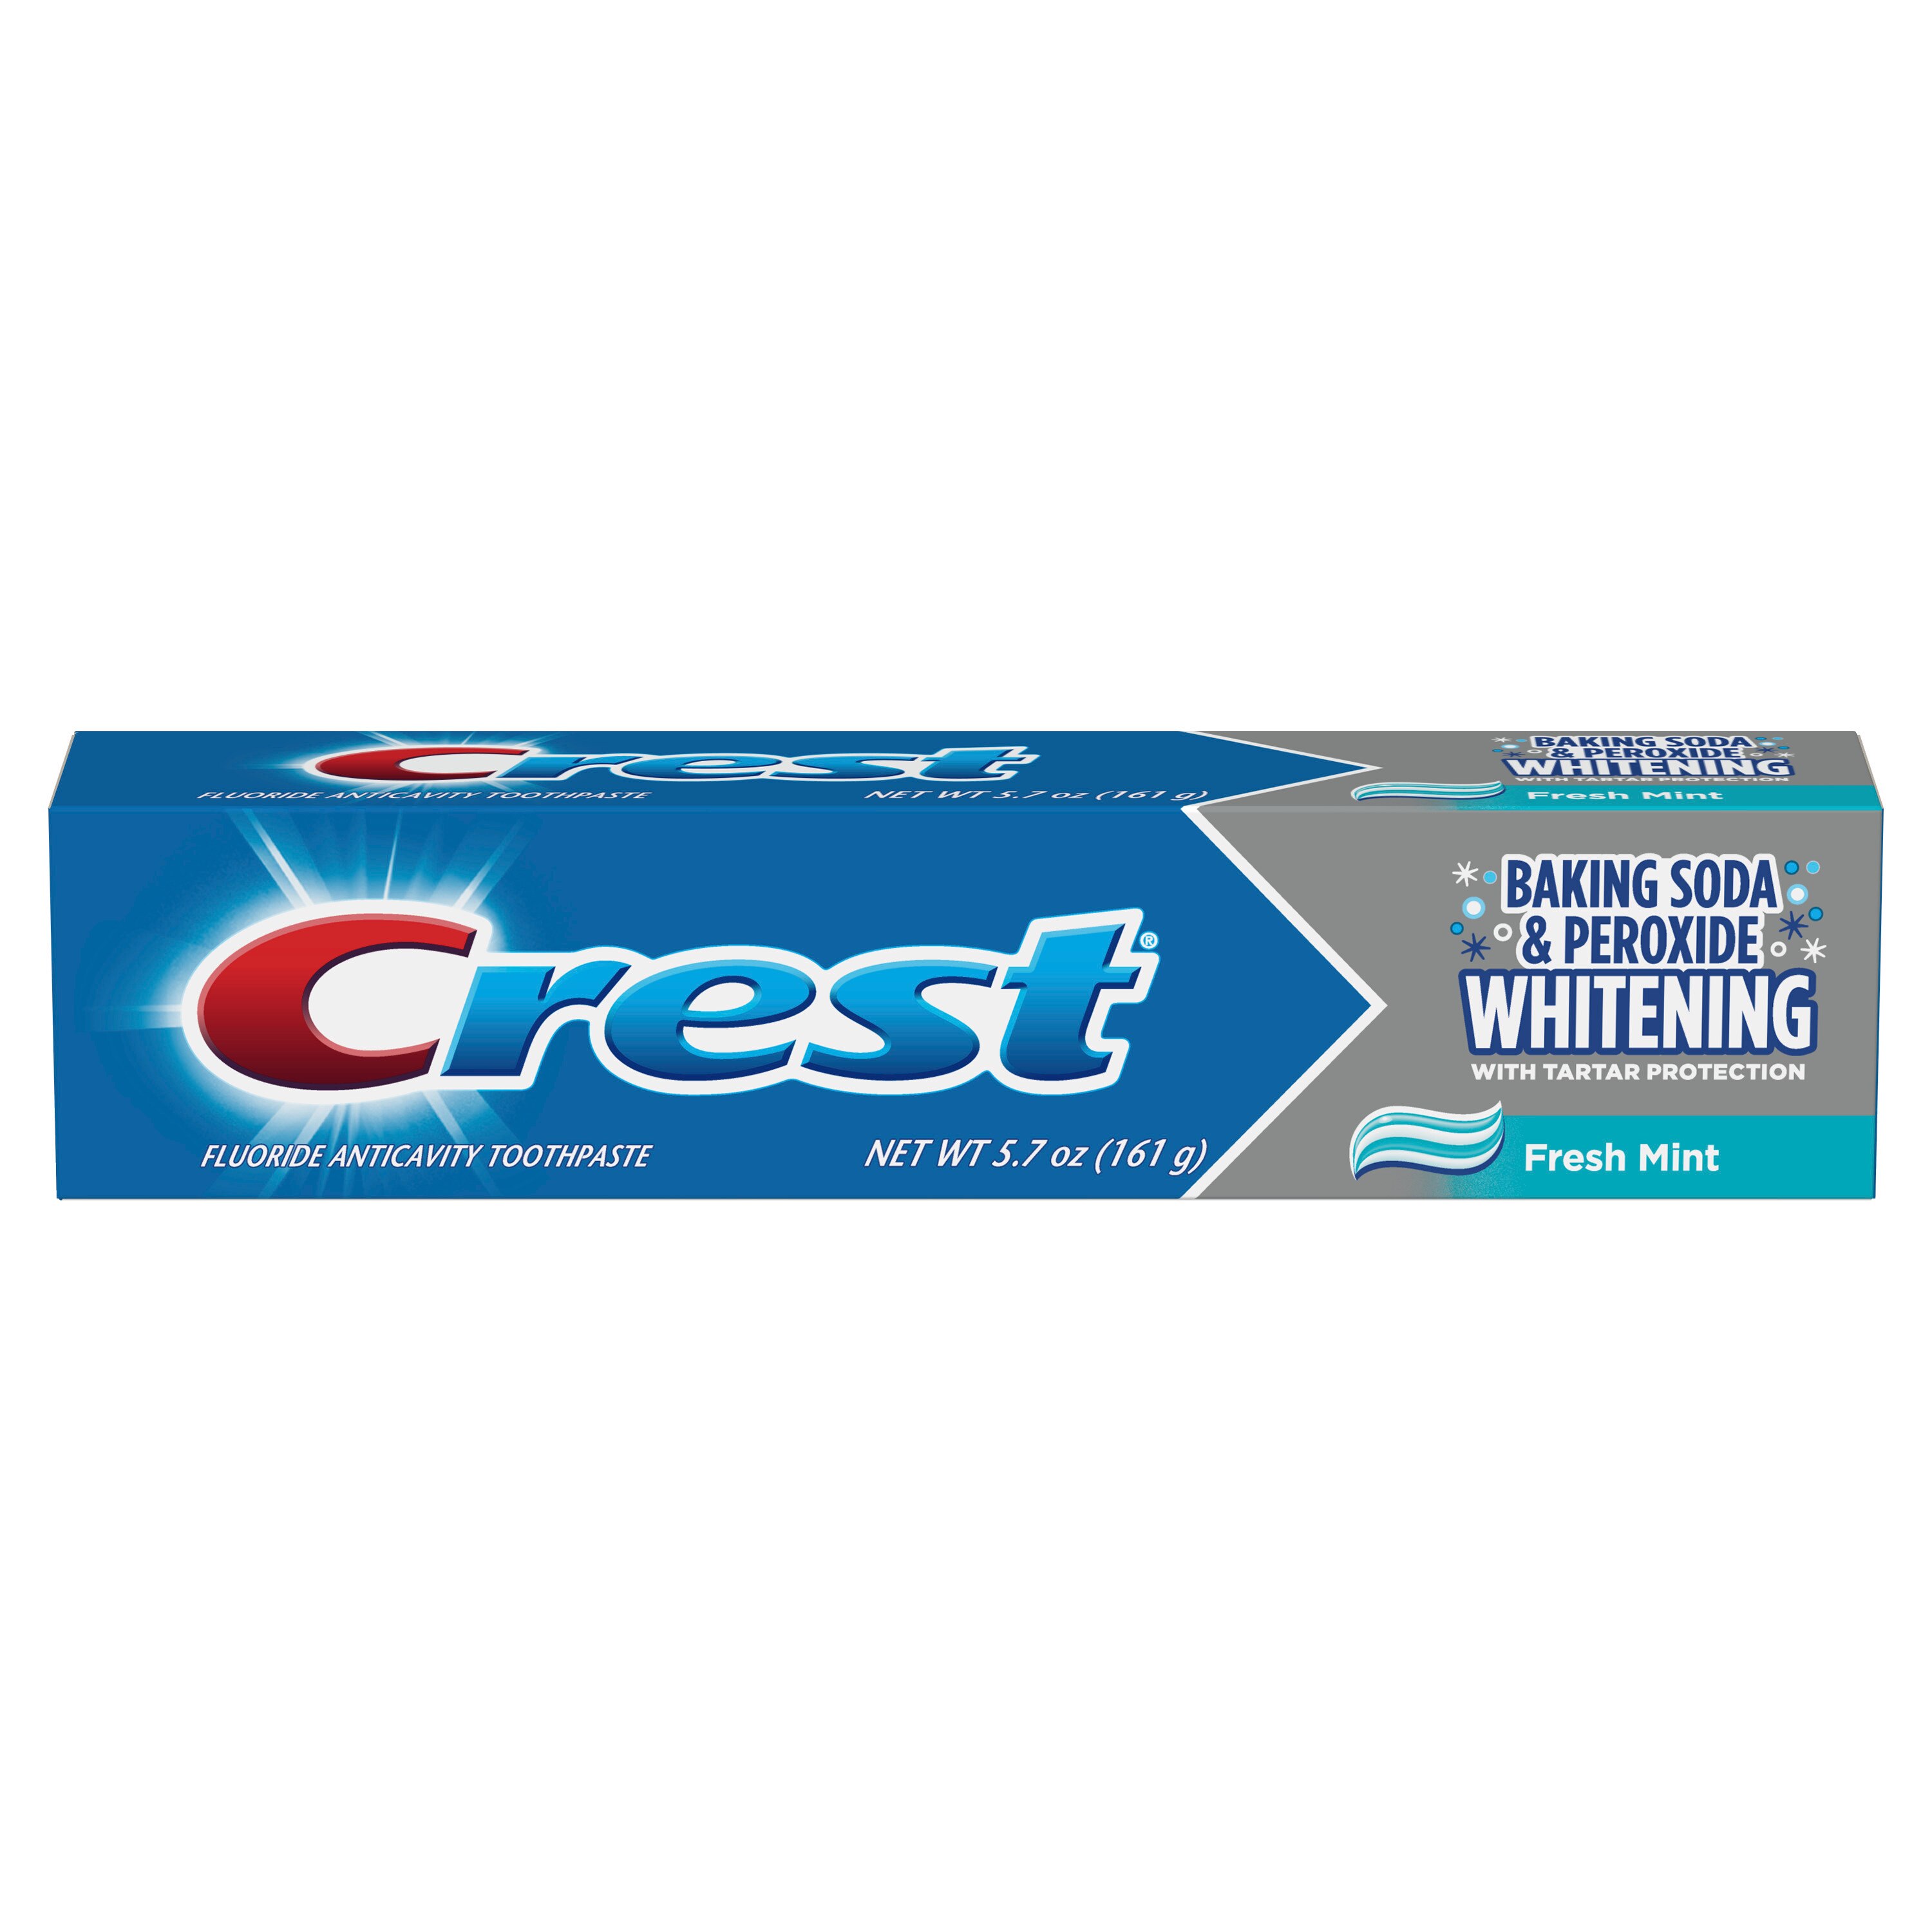 Crest Baking Soda and Peroxide Whitening Fluoride Toothpaste with Tartar Protection, Fresh Mint, 5.7 OZ